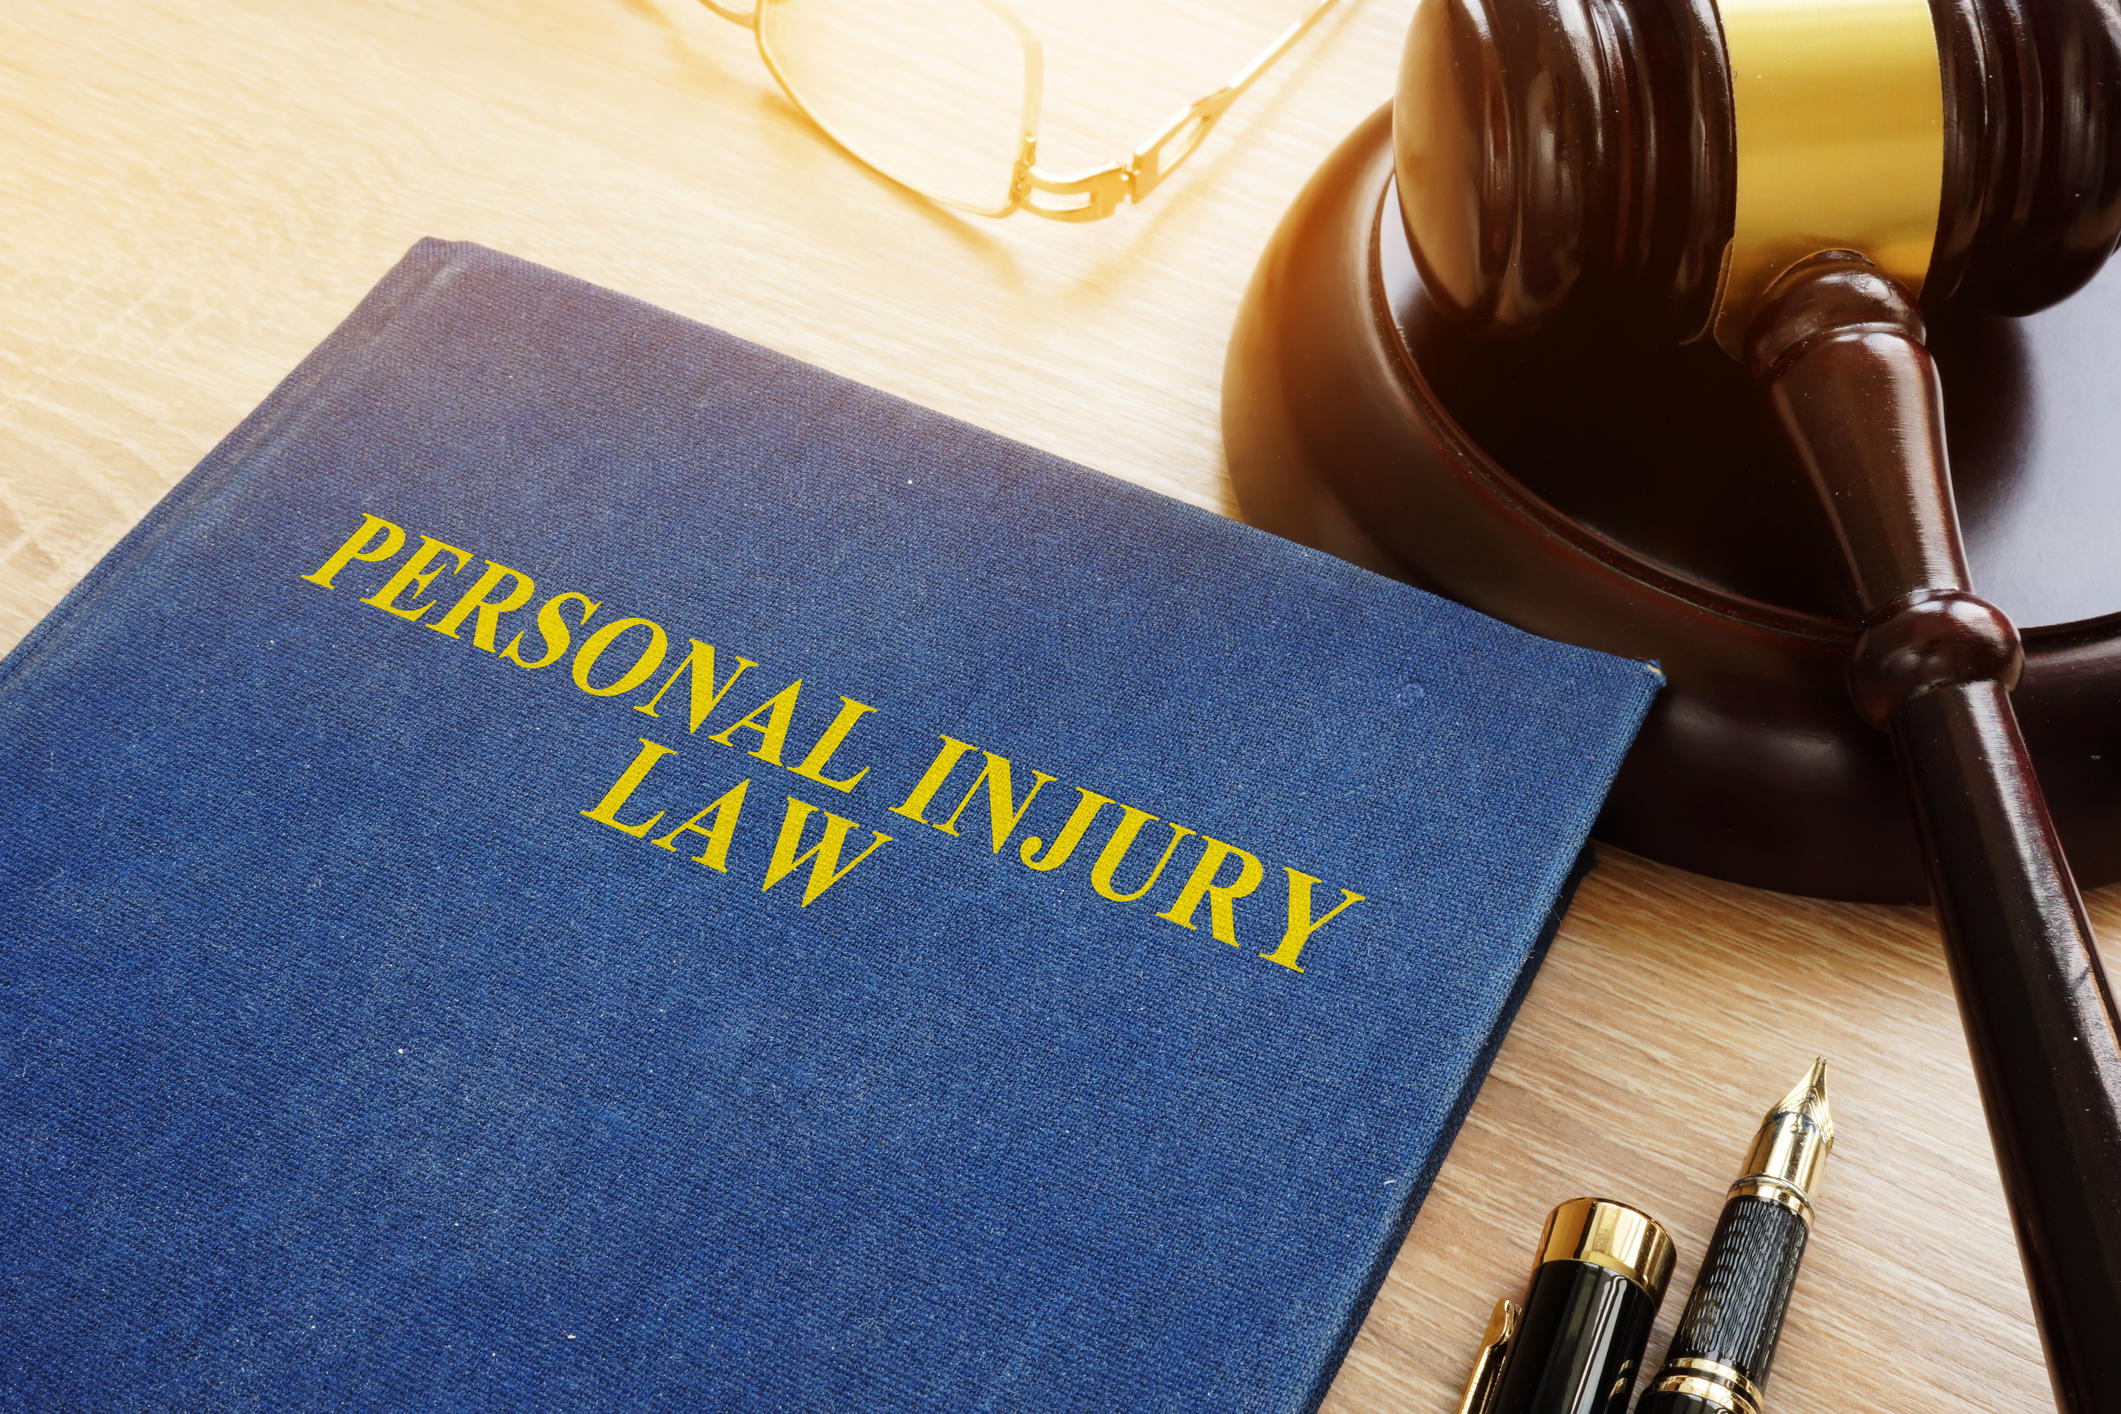 If you have been seriously injured by the negligence of another party, you should consider your legal options.